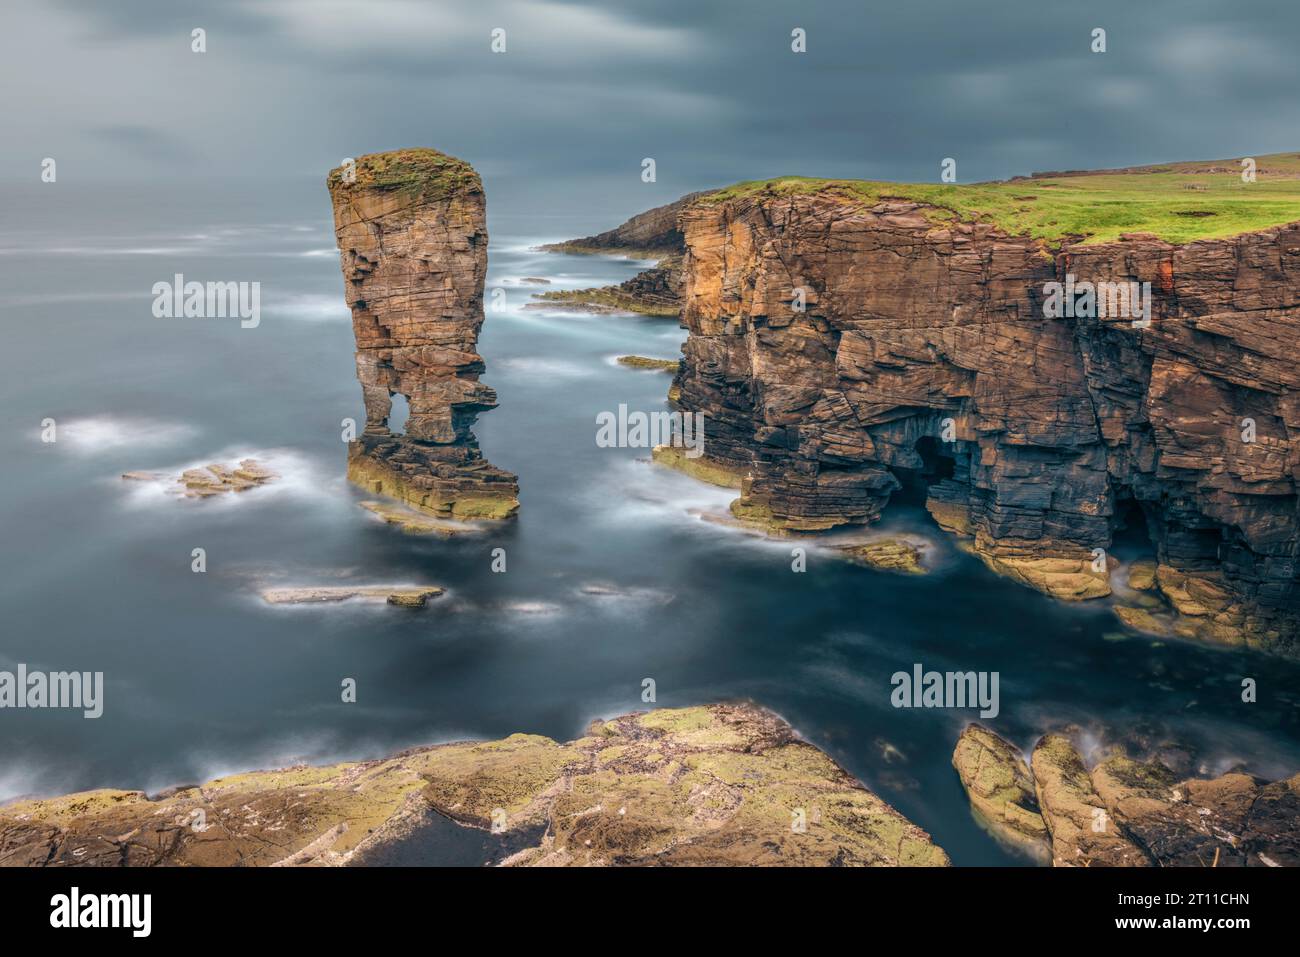 Yesnaby Castle is a famous two-legged sea stack near Sandwick on the Mainland in Orkney, Scotland. Stock Photo